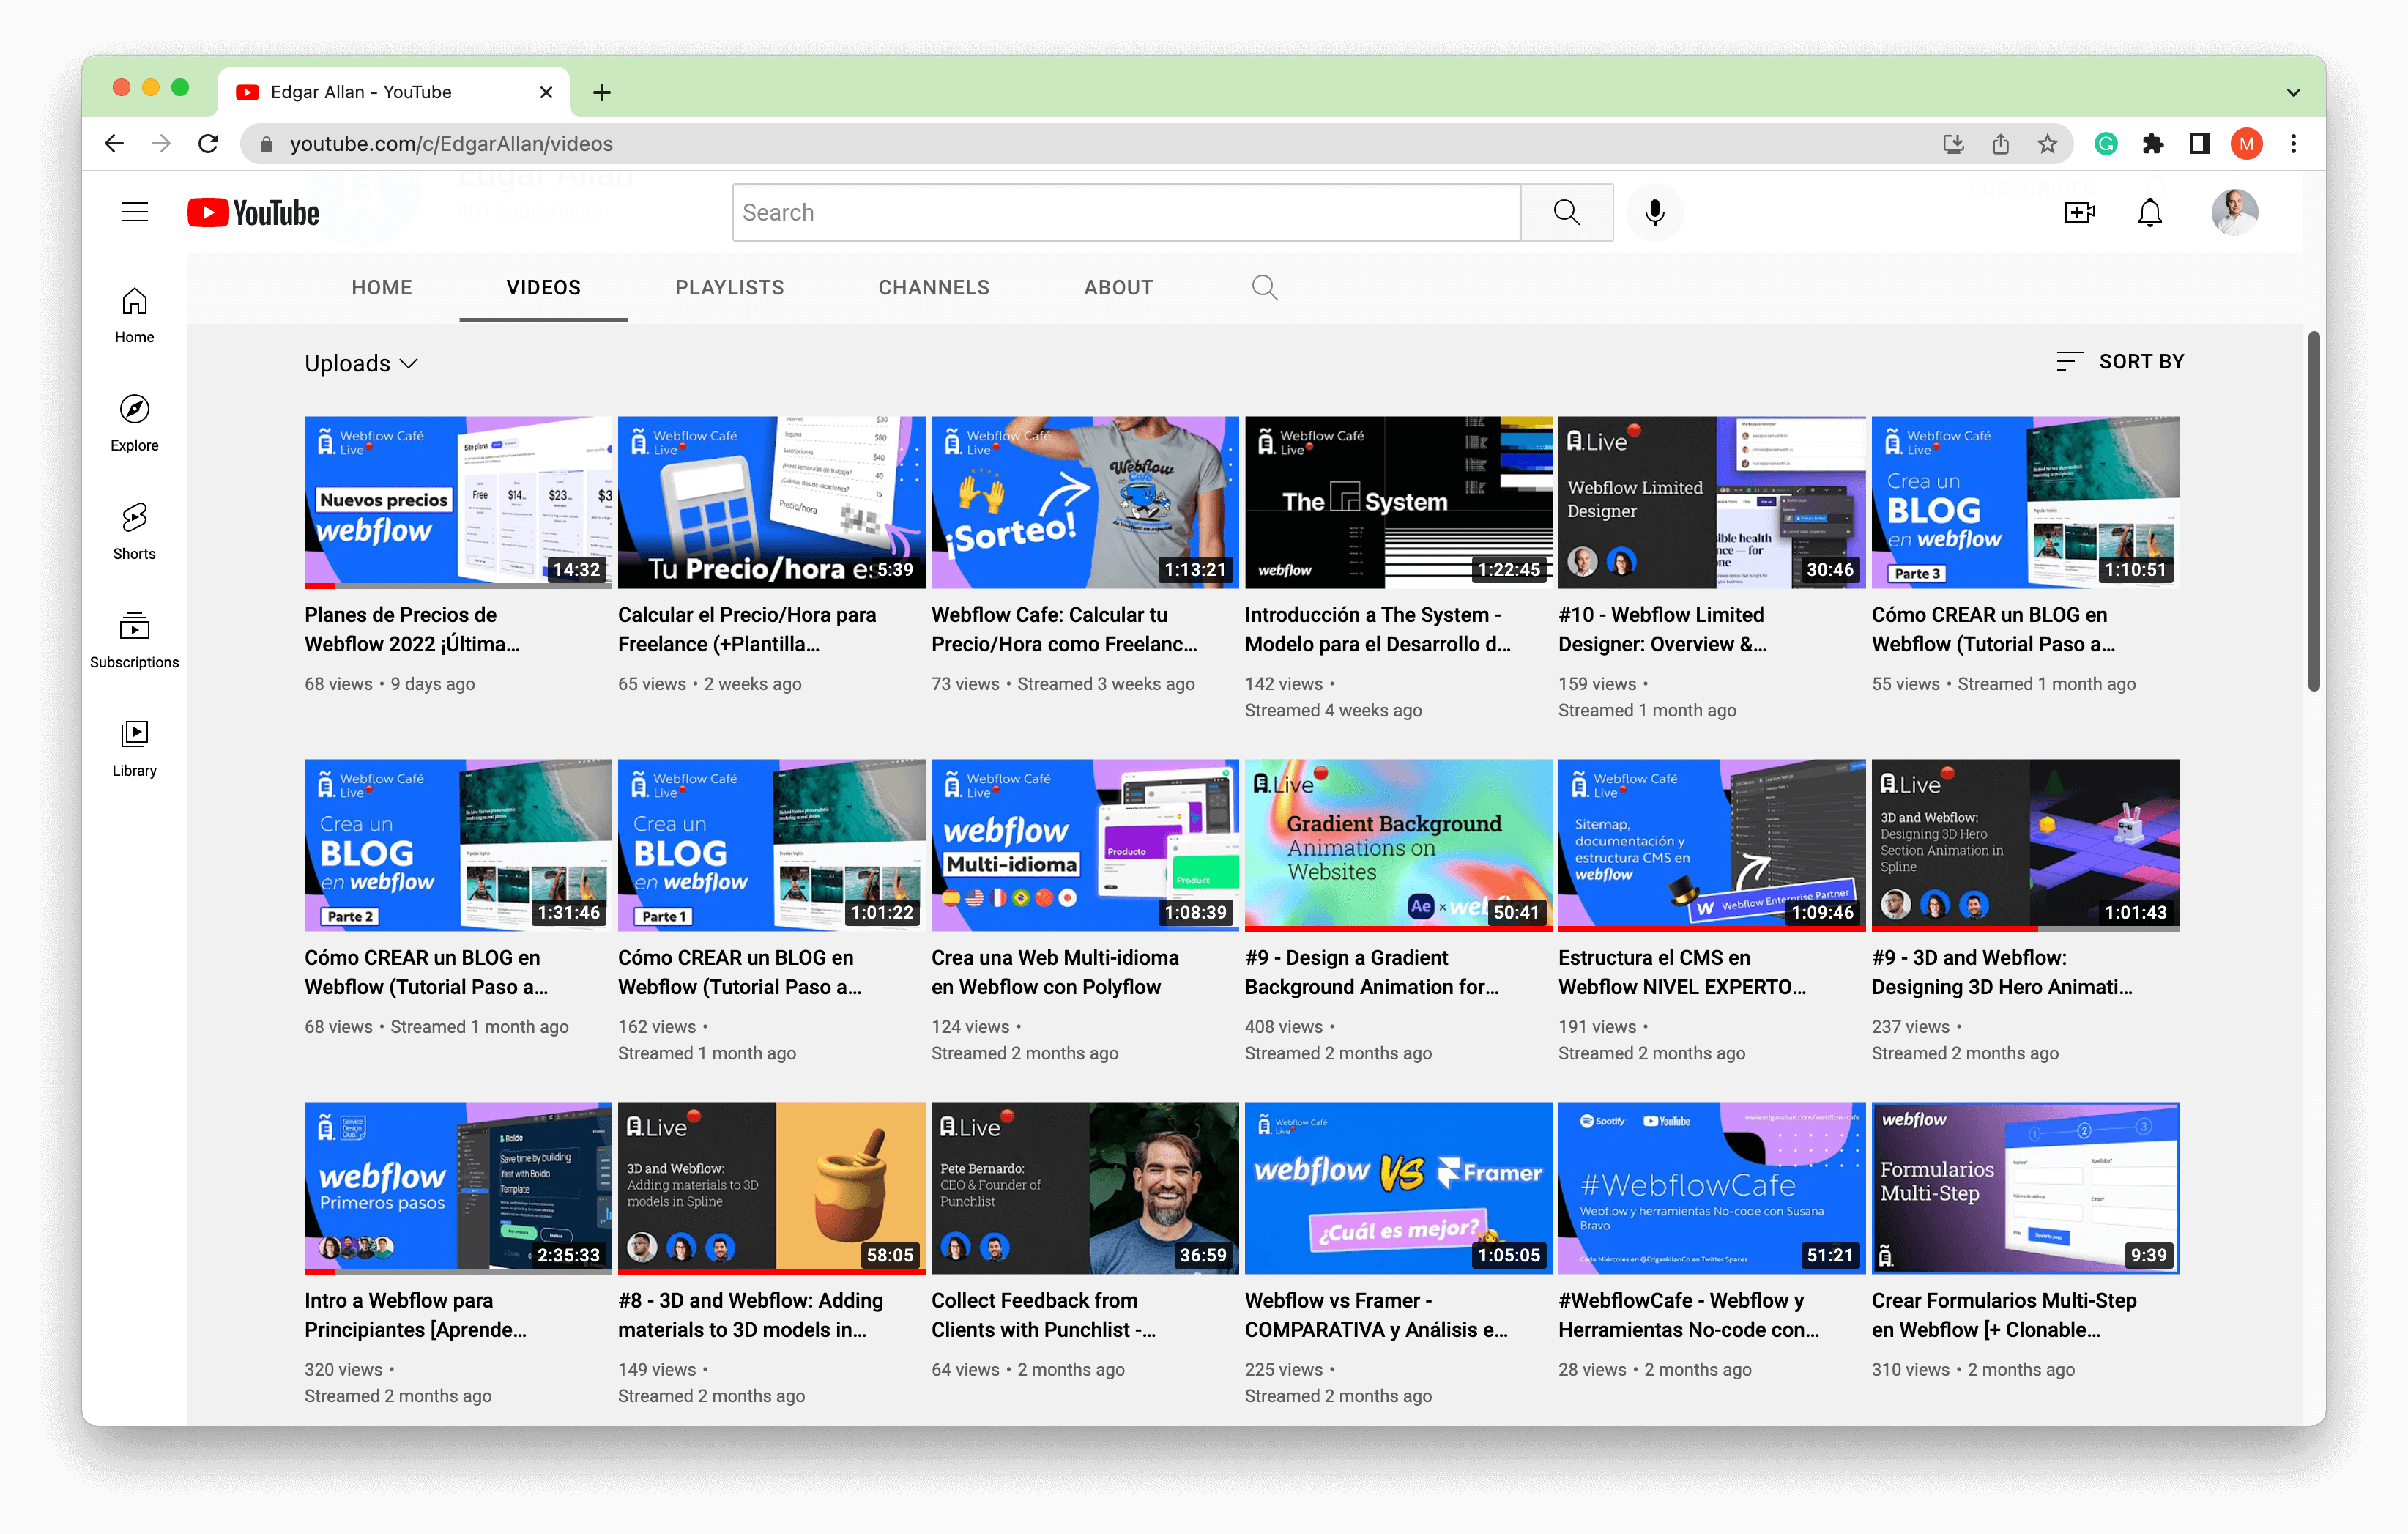 Image of the YouTube channel for Edgar Allan